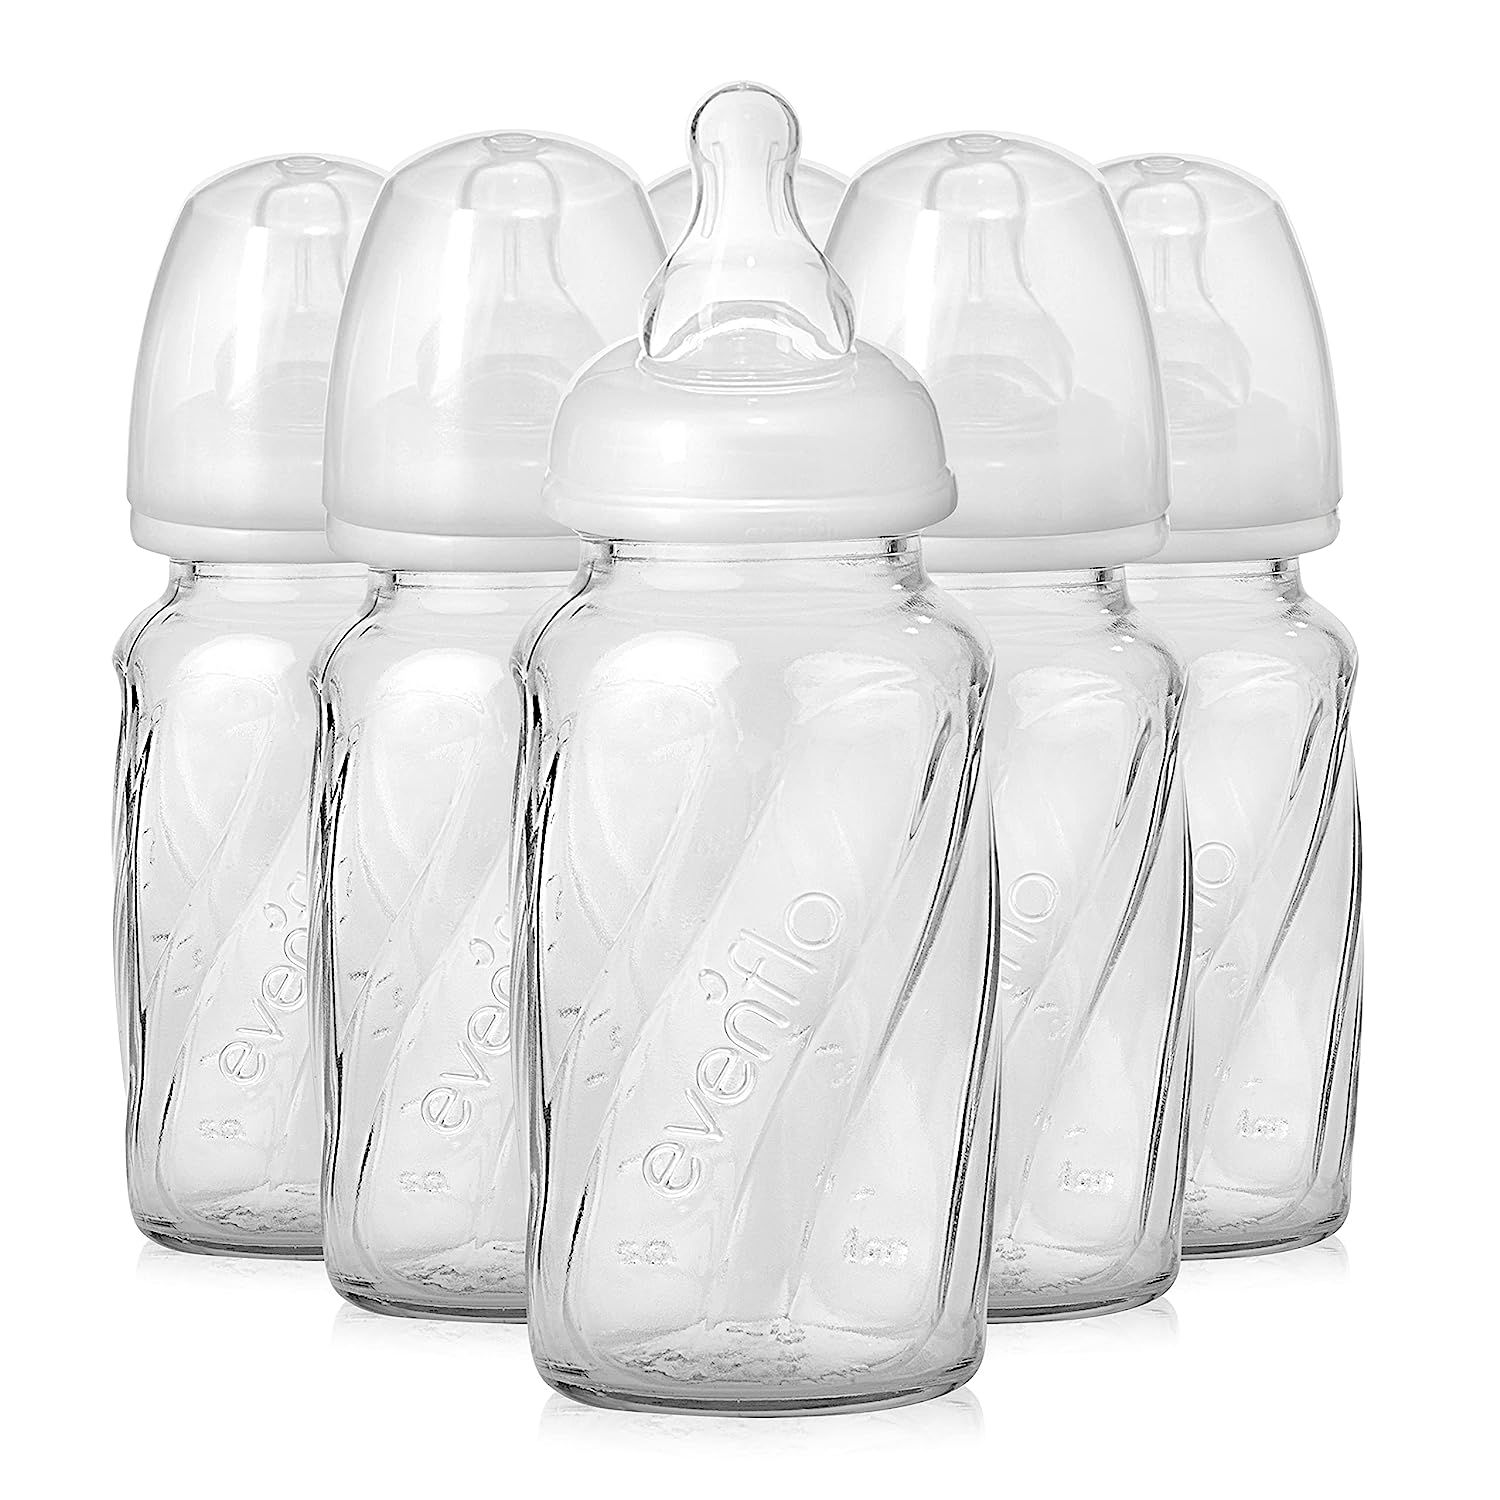 Evenflo Feeding Glass Premium Proflo Vented Plus Bottles for Baby, Infant and Newborn - Helps Red... | Amazon (US)